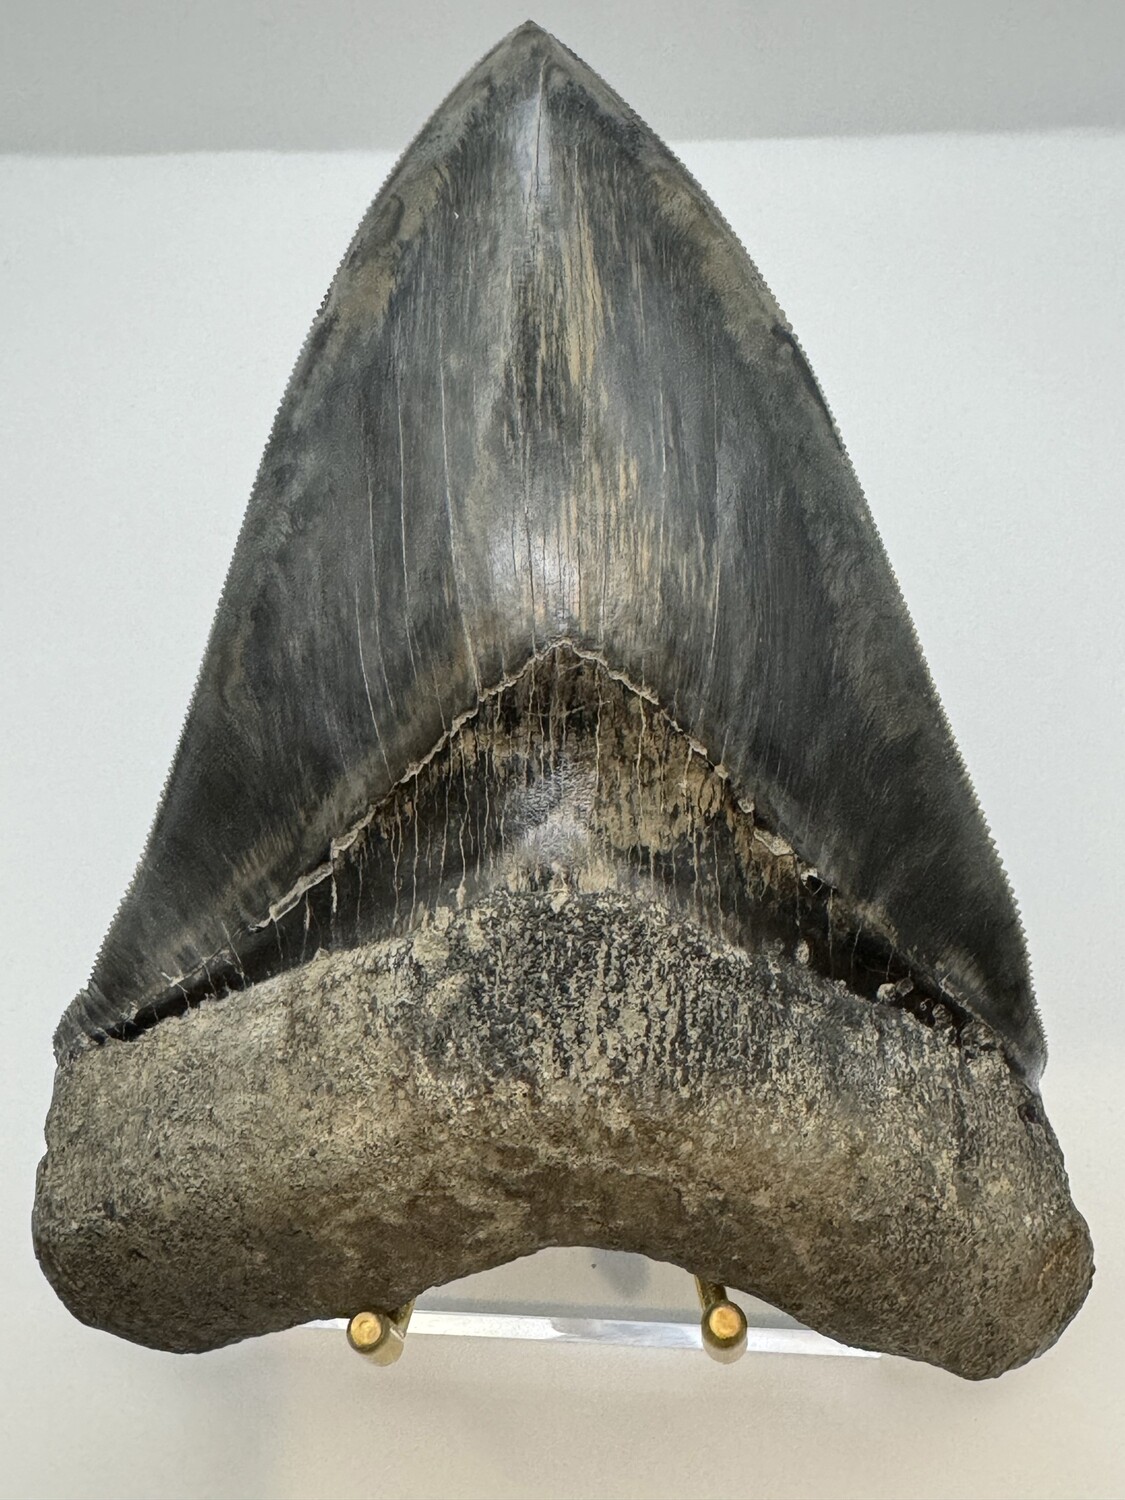 6.09" Masterpiece! Possibly best Megalodon tooth fossil on the planet